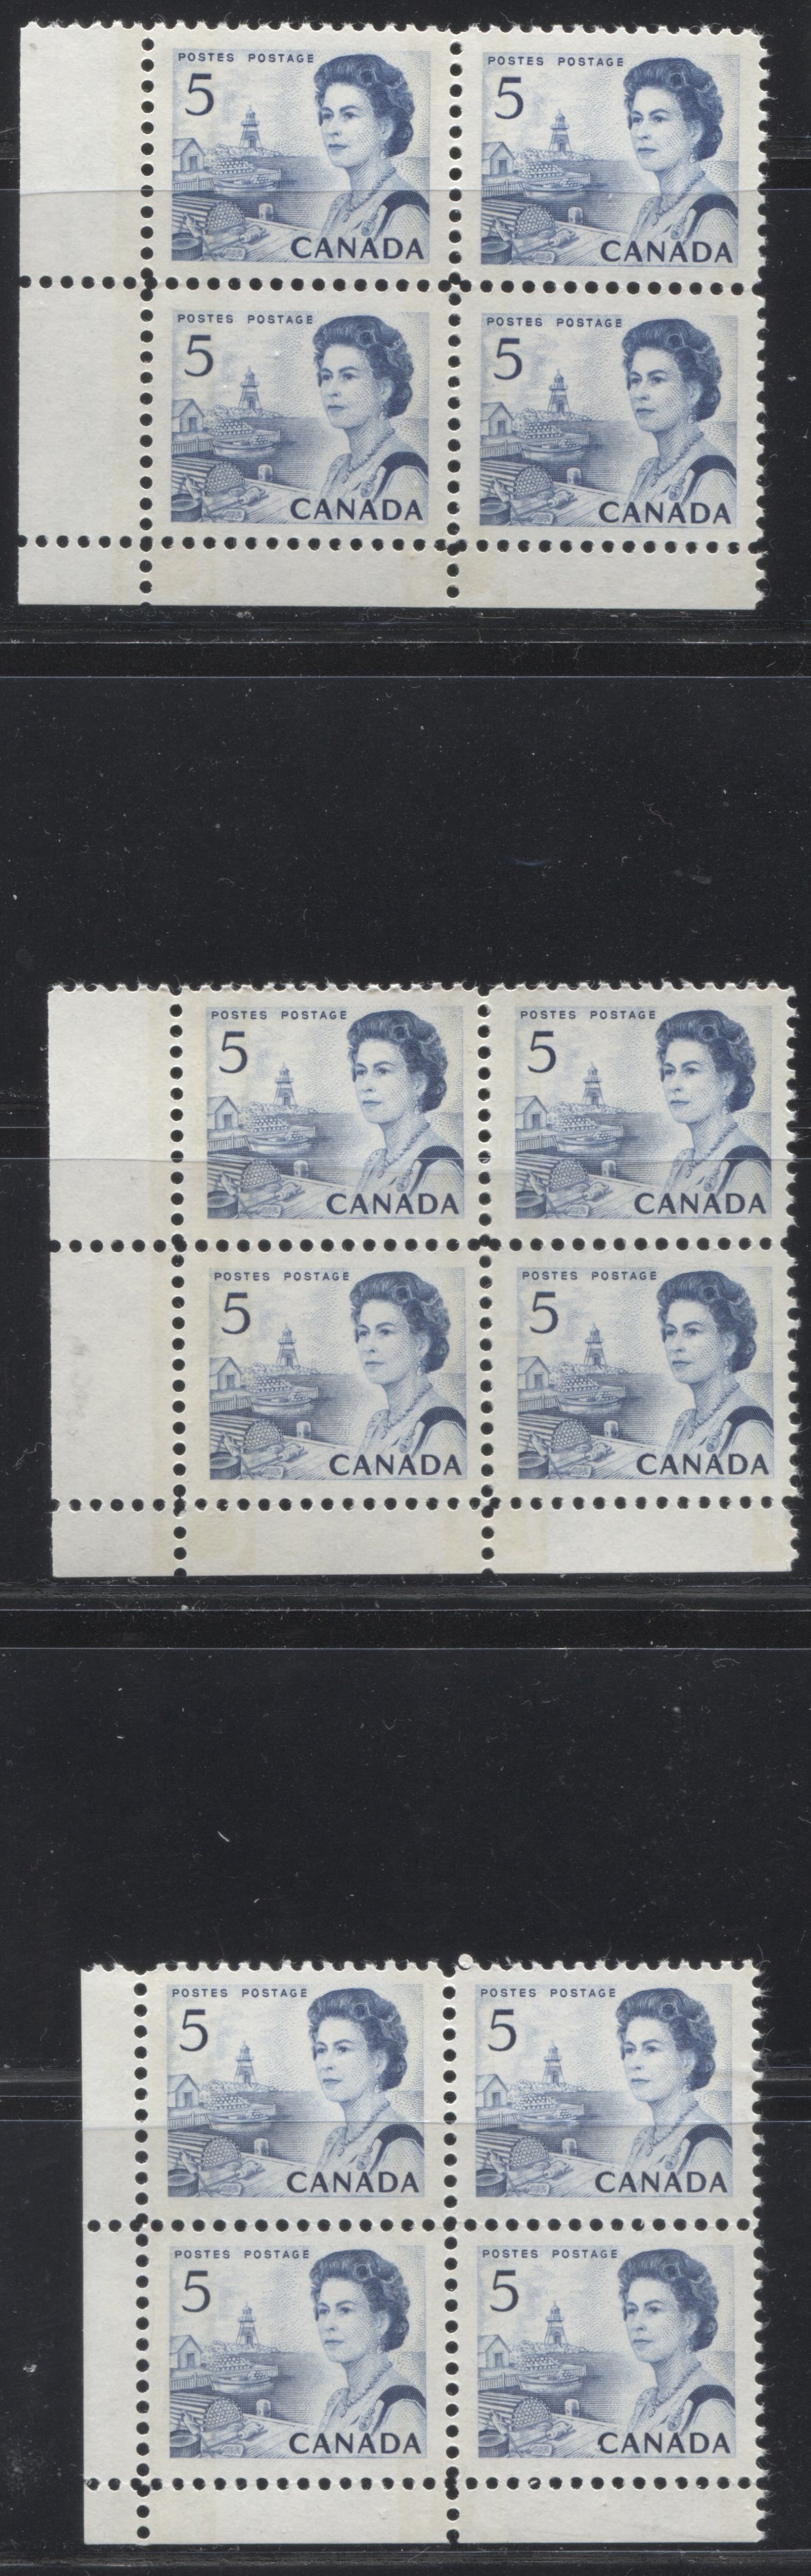 Lot 201 Canada #458pvar 5c Deep Blue Atlantic Fishing Village, 1967-1973 Centennial Definitive Issue, Lower Left W2B Tagged Corner Blocks, A Specialized VFNH Group of 3 Blocks With Narrow and Wide Spacing Between Tag Bars